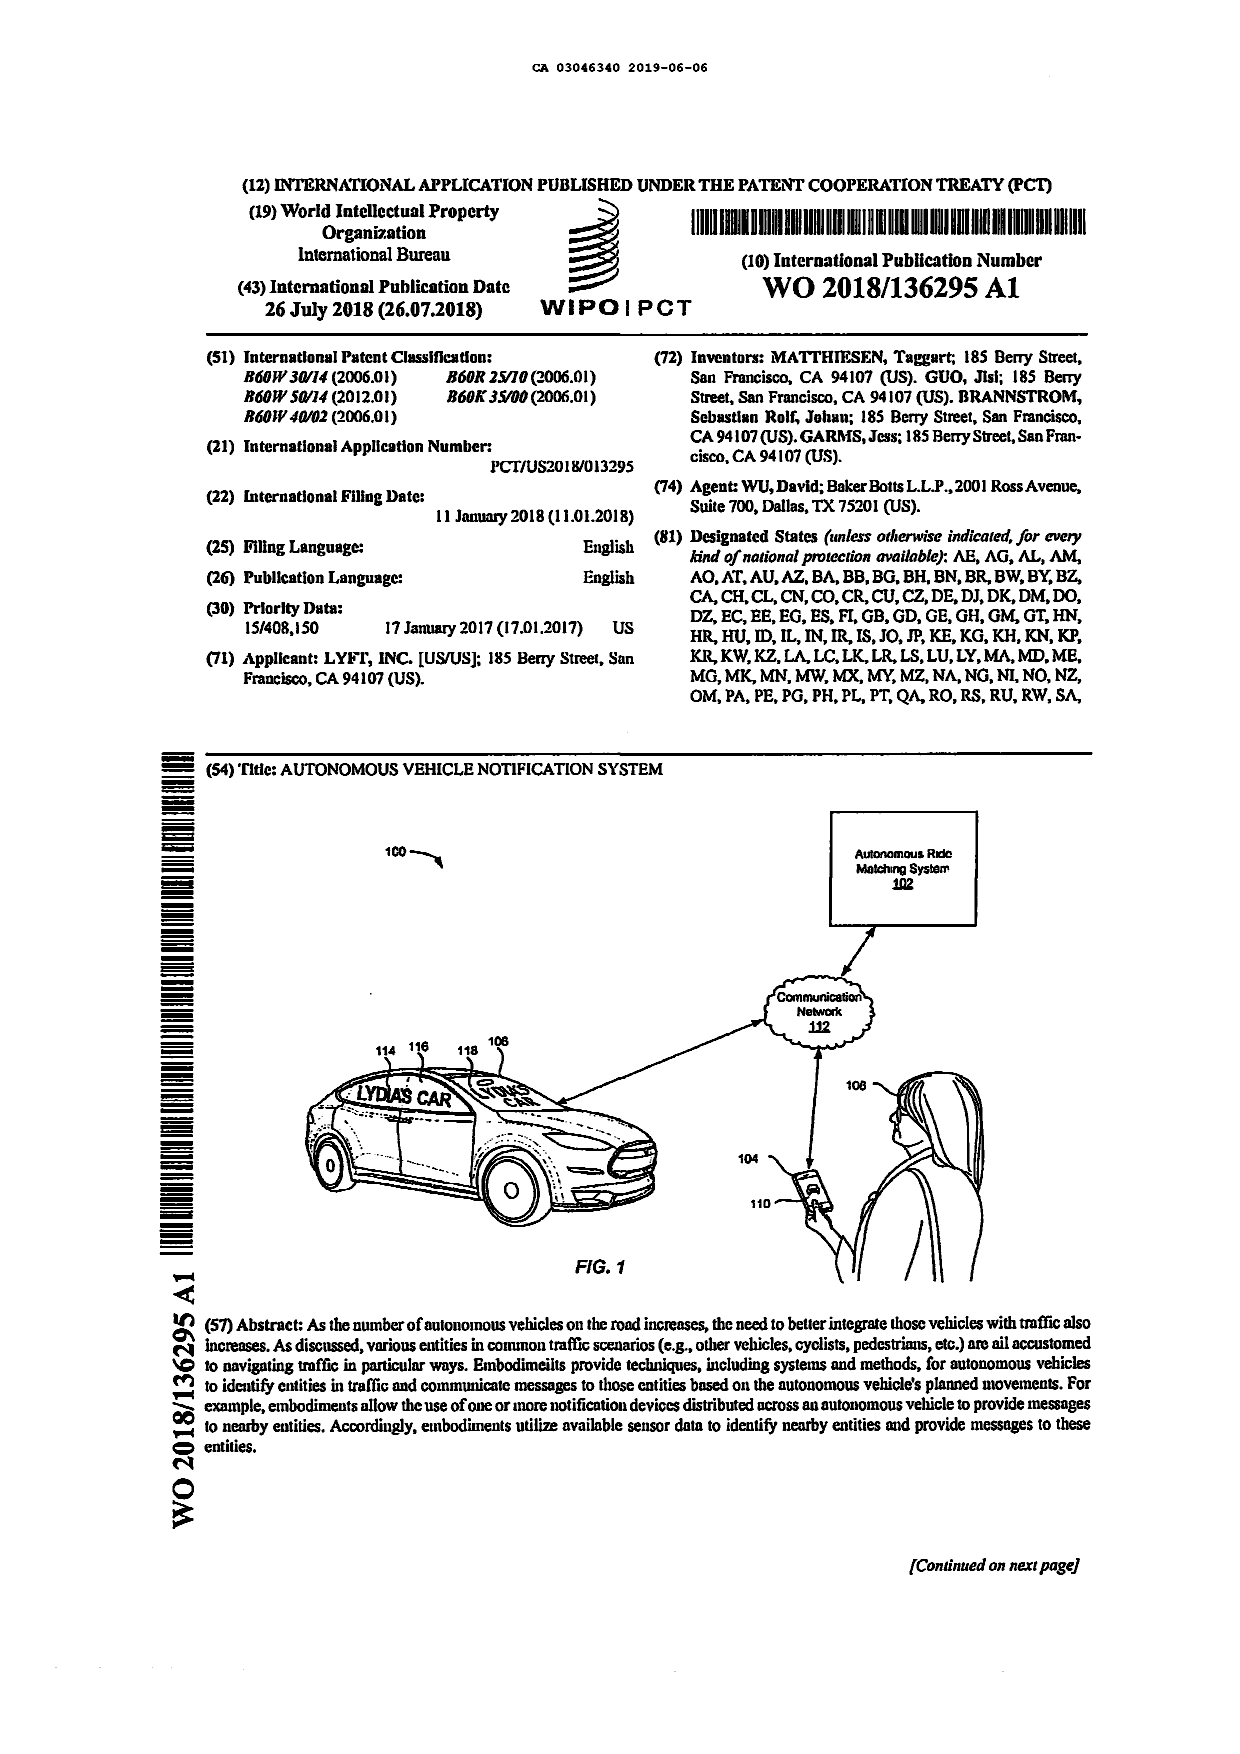 Canadian Patent Document 3046340. Patent Cooperation Treaty (PCT) 20190606. Image 1 of 13